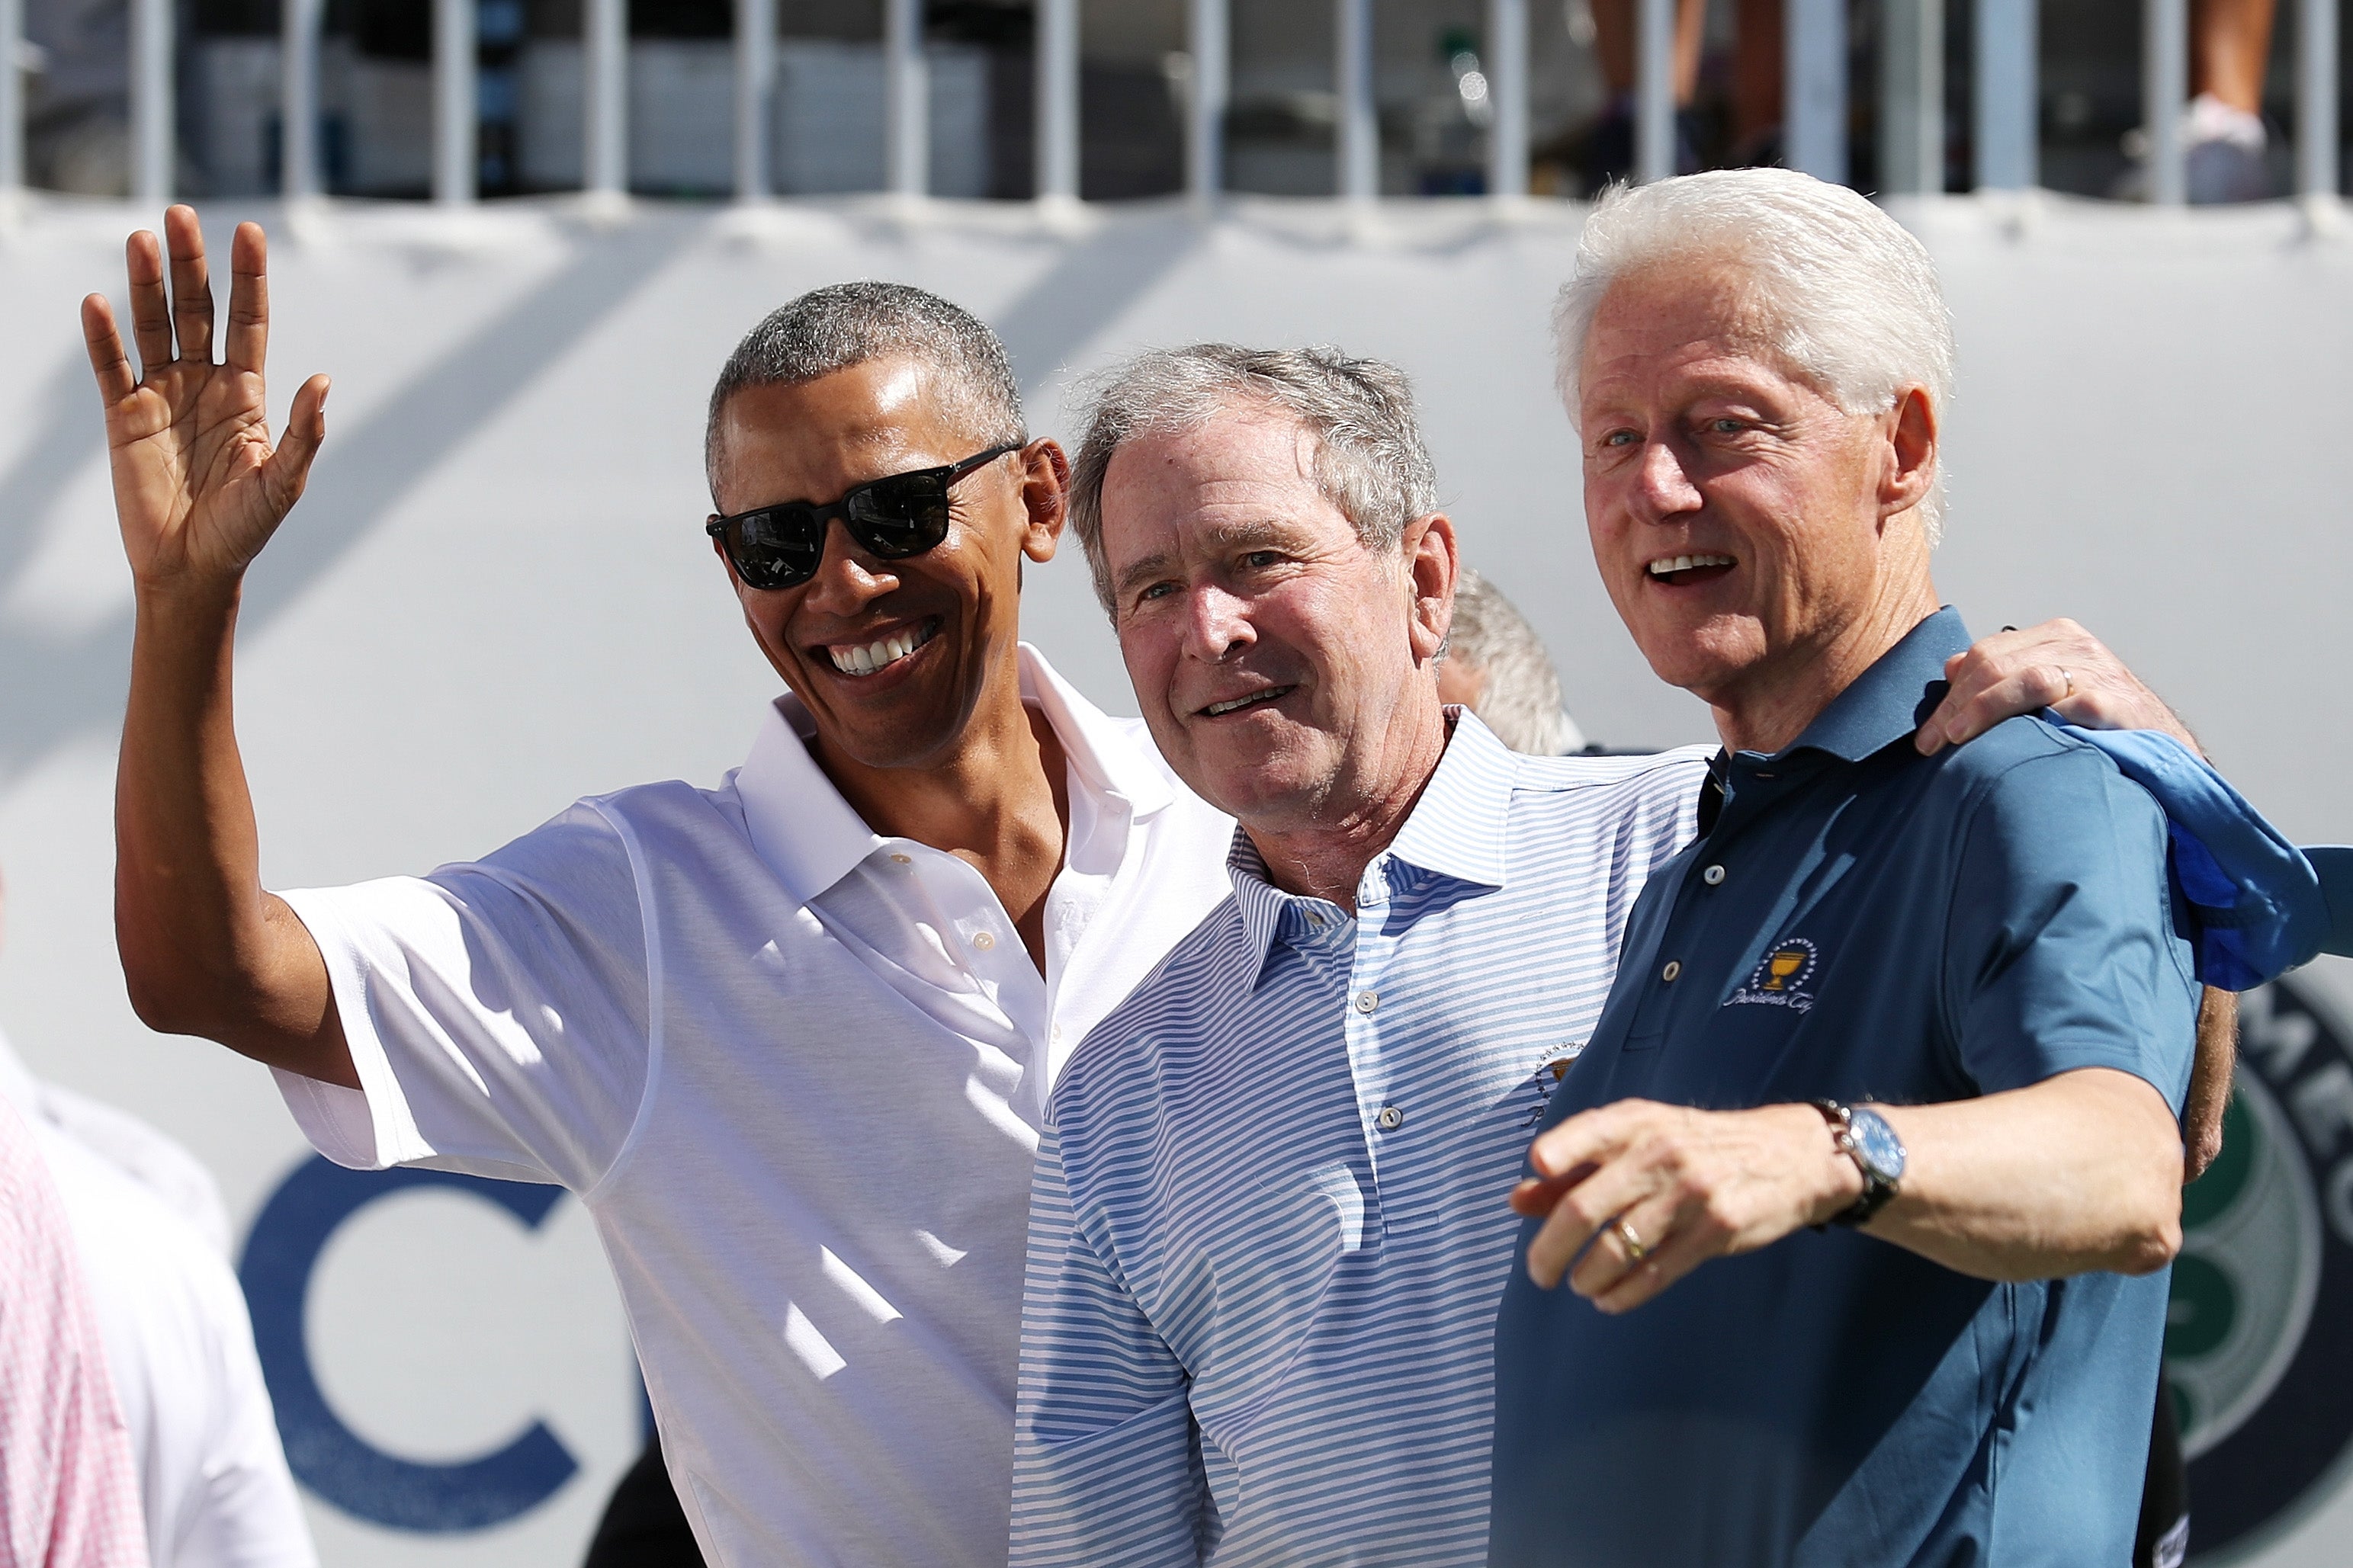 Former U.S. Presidents Barack Obama, George W. Bush and Bill Clinton attend the trophy presentation prior to Thursday foursome matches of the Presidents Cup at Liberty National Golf Club on September 28, 2017 in Jersey City, New Jersey